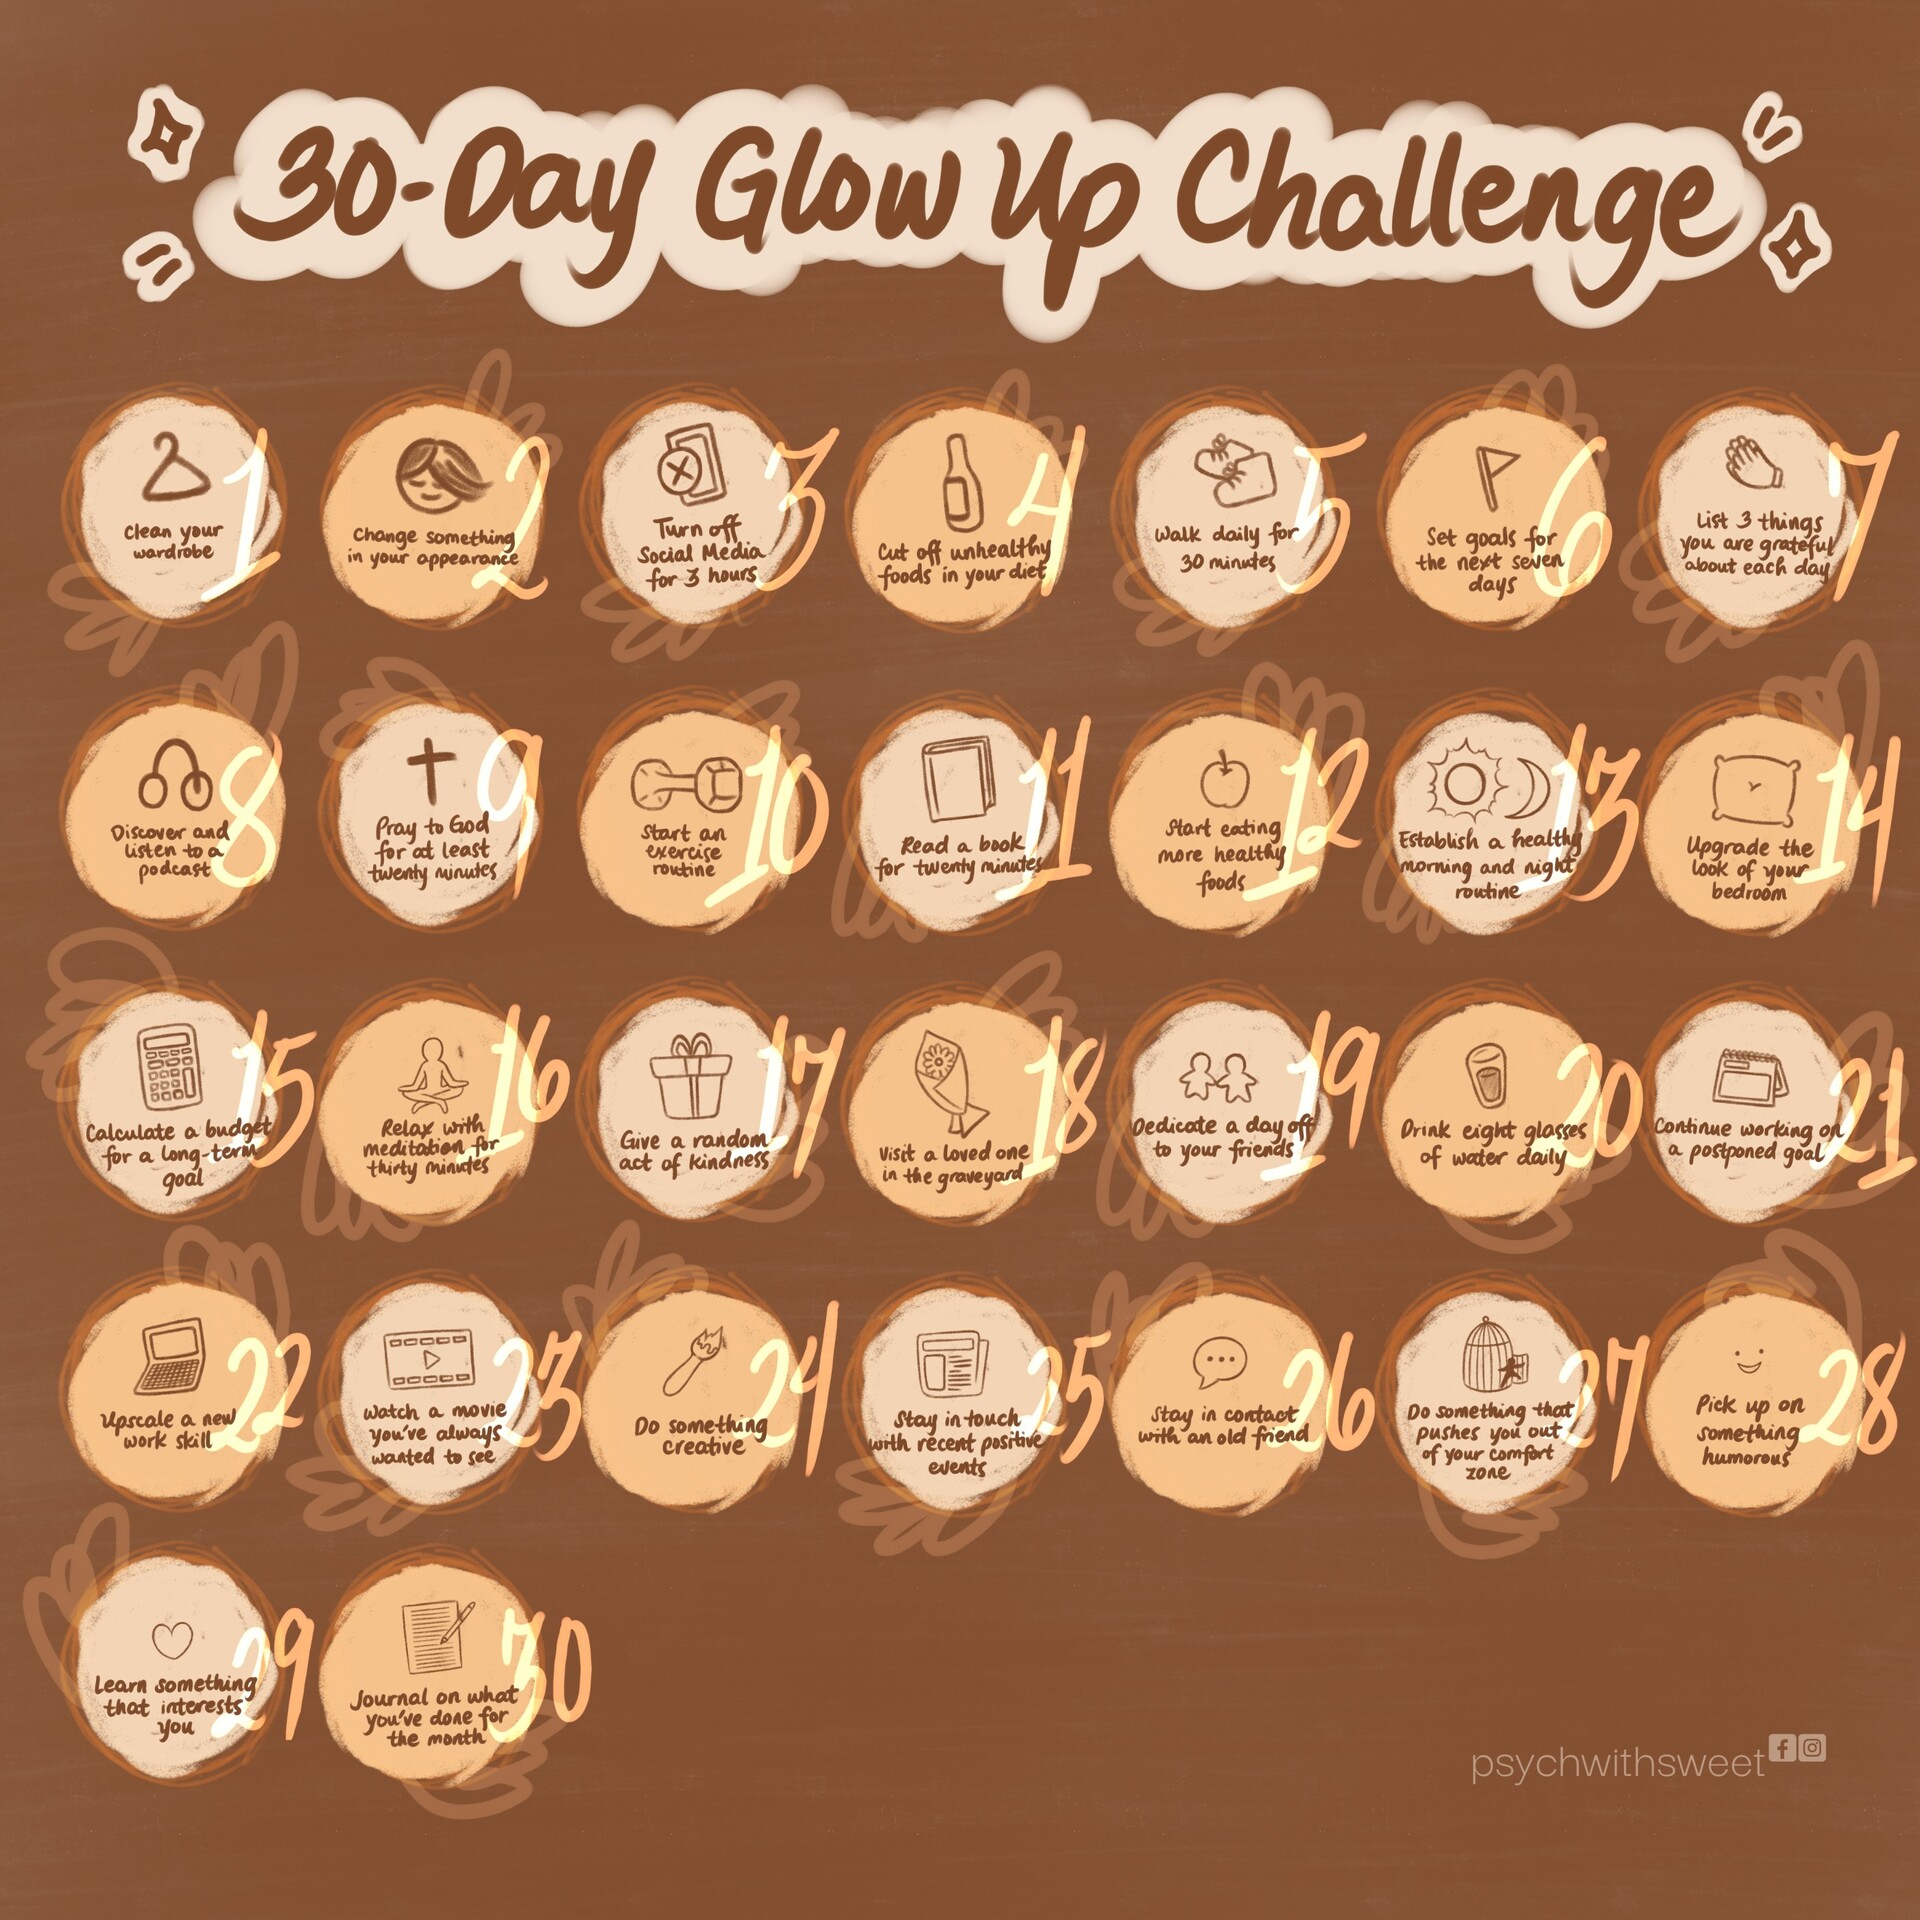 A 30-Day Glow-Up Challenge to Glow Up in a Month